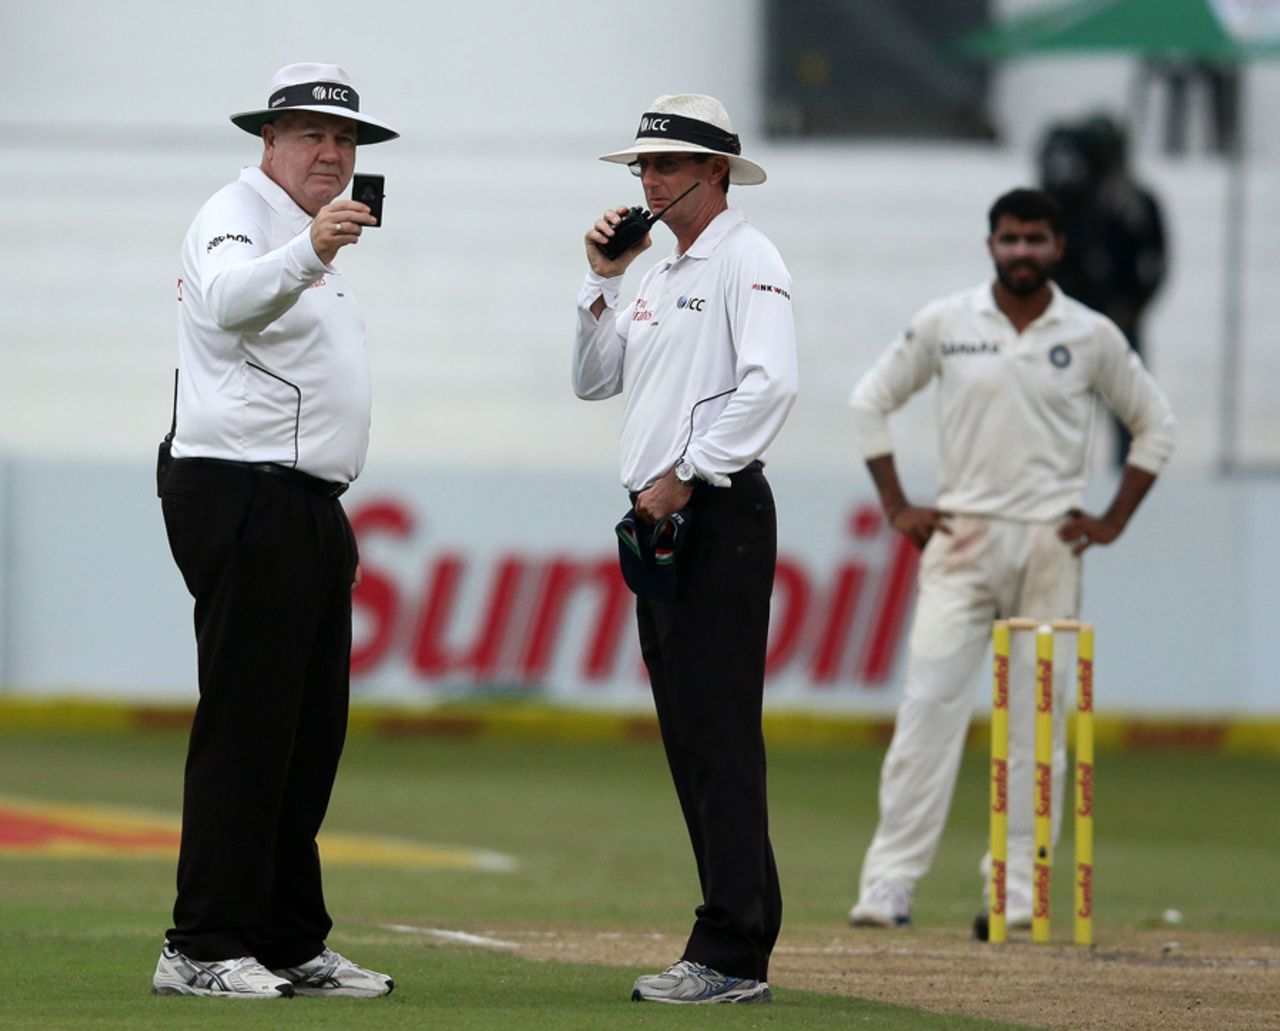 Umpires Steve Davis and Rod Tucker have a look at the light meter, South Africa v India, 2nd Test, Durban, 3rd day, December 28, 2013